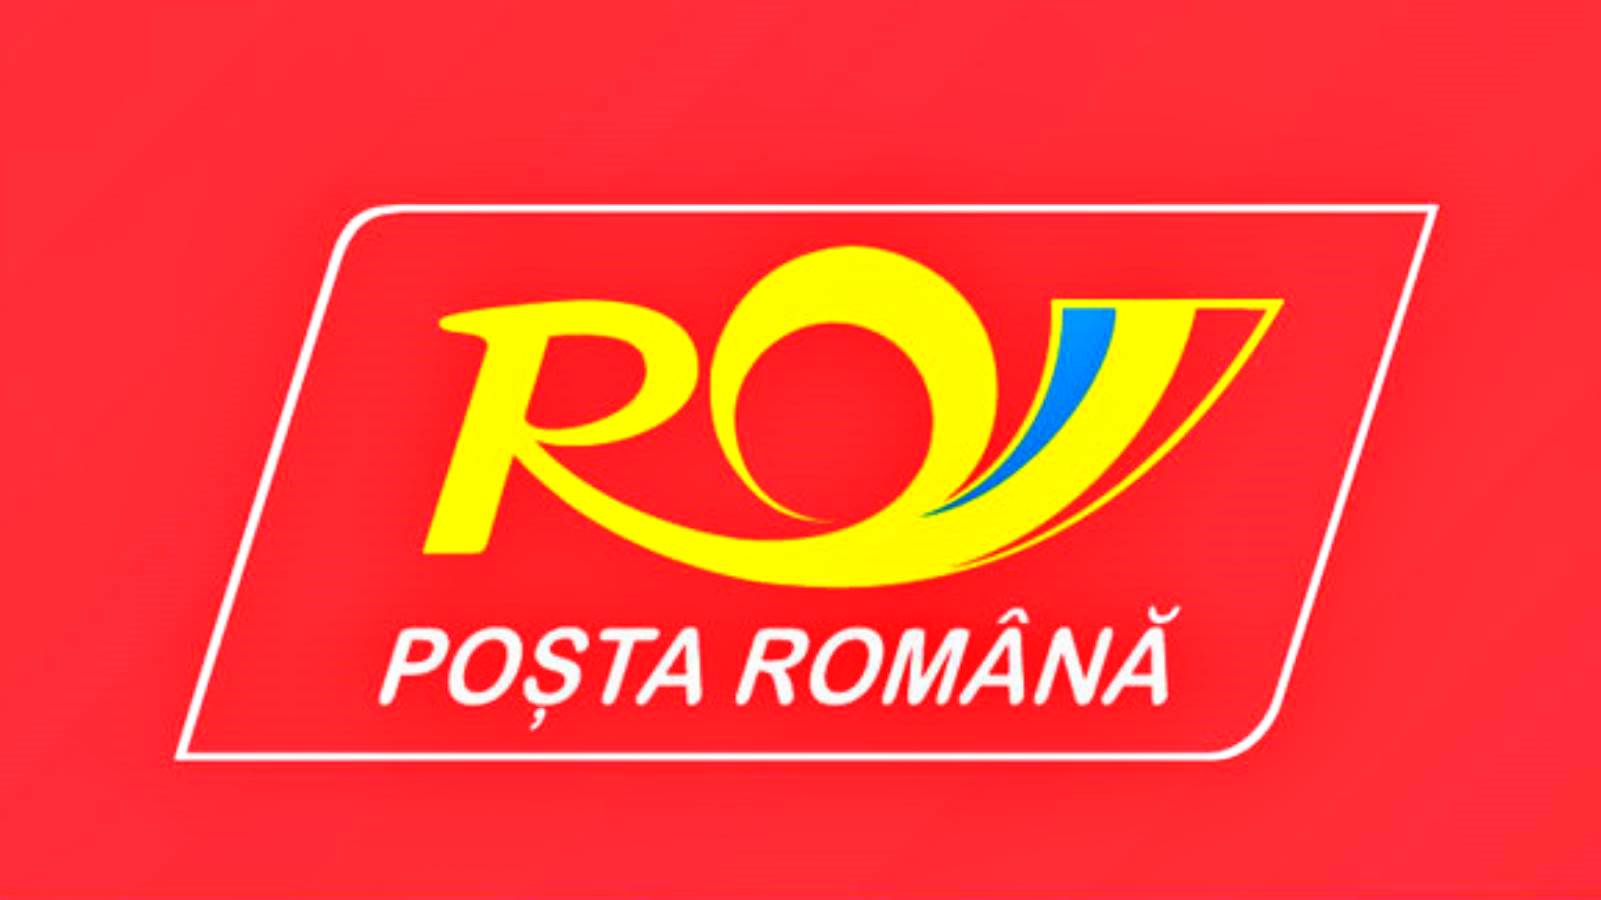 The measures announced by the Romanian Post for Romanians all over the country